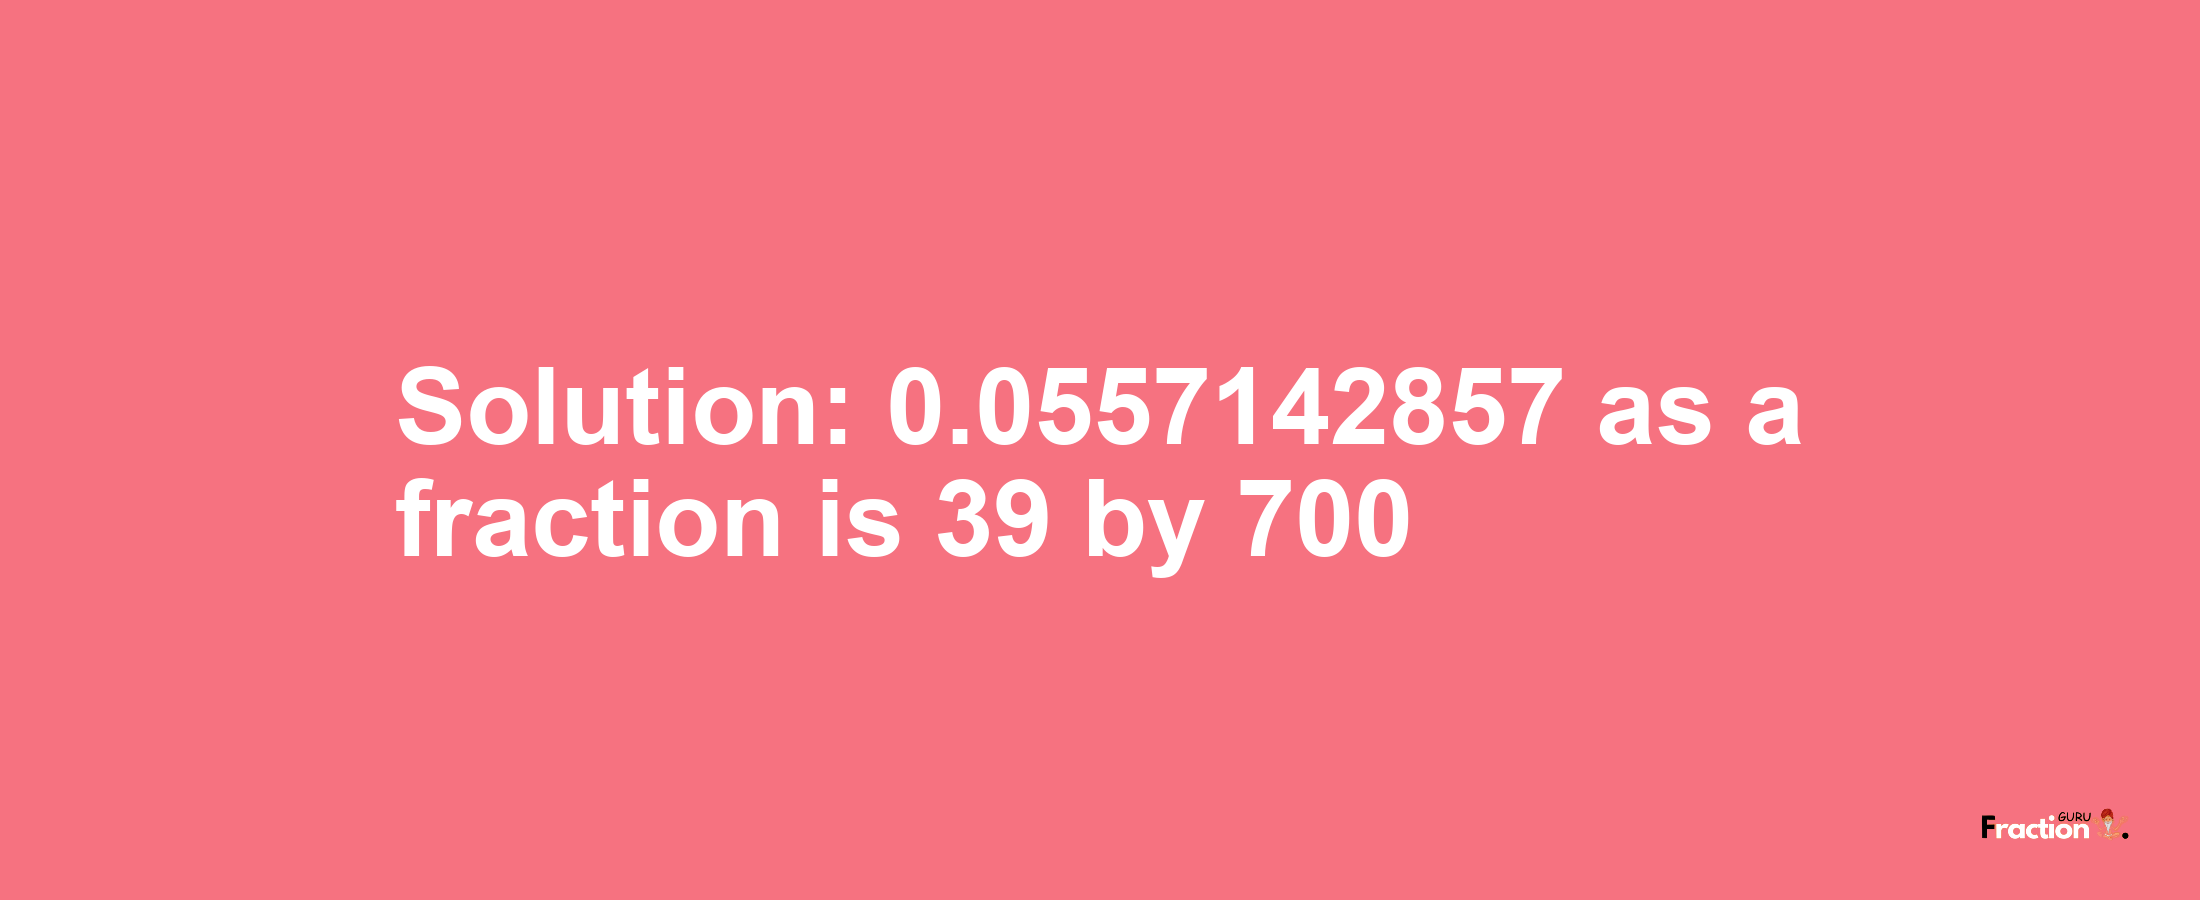 Solution:0.0557142857 as a fraction is 39/700